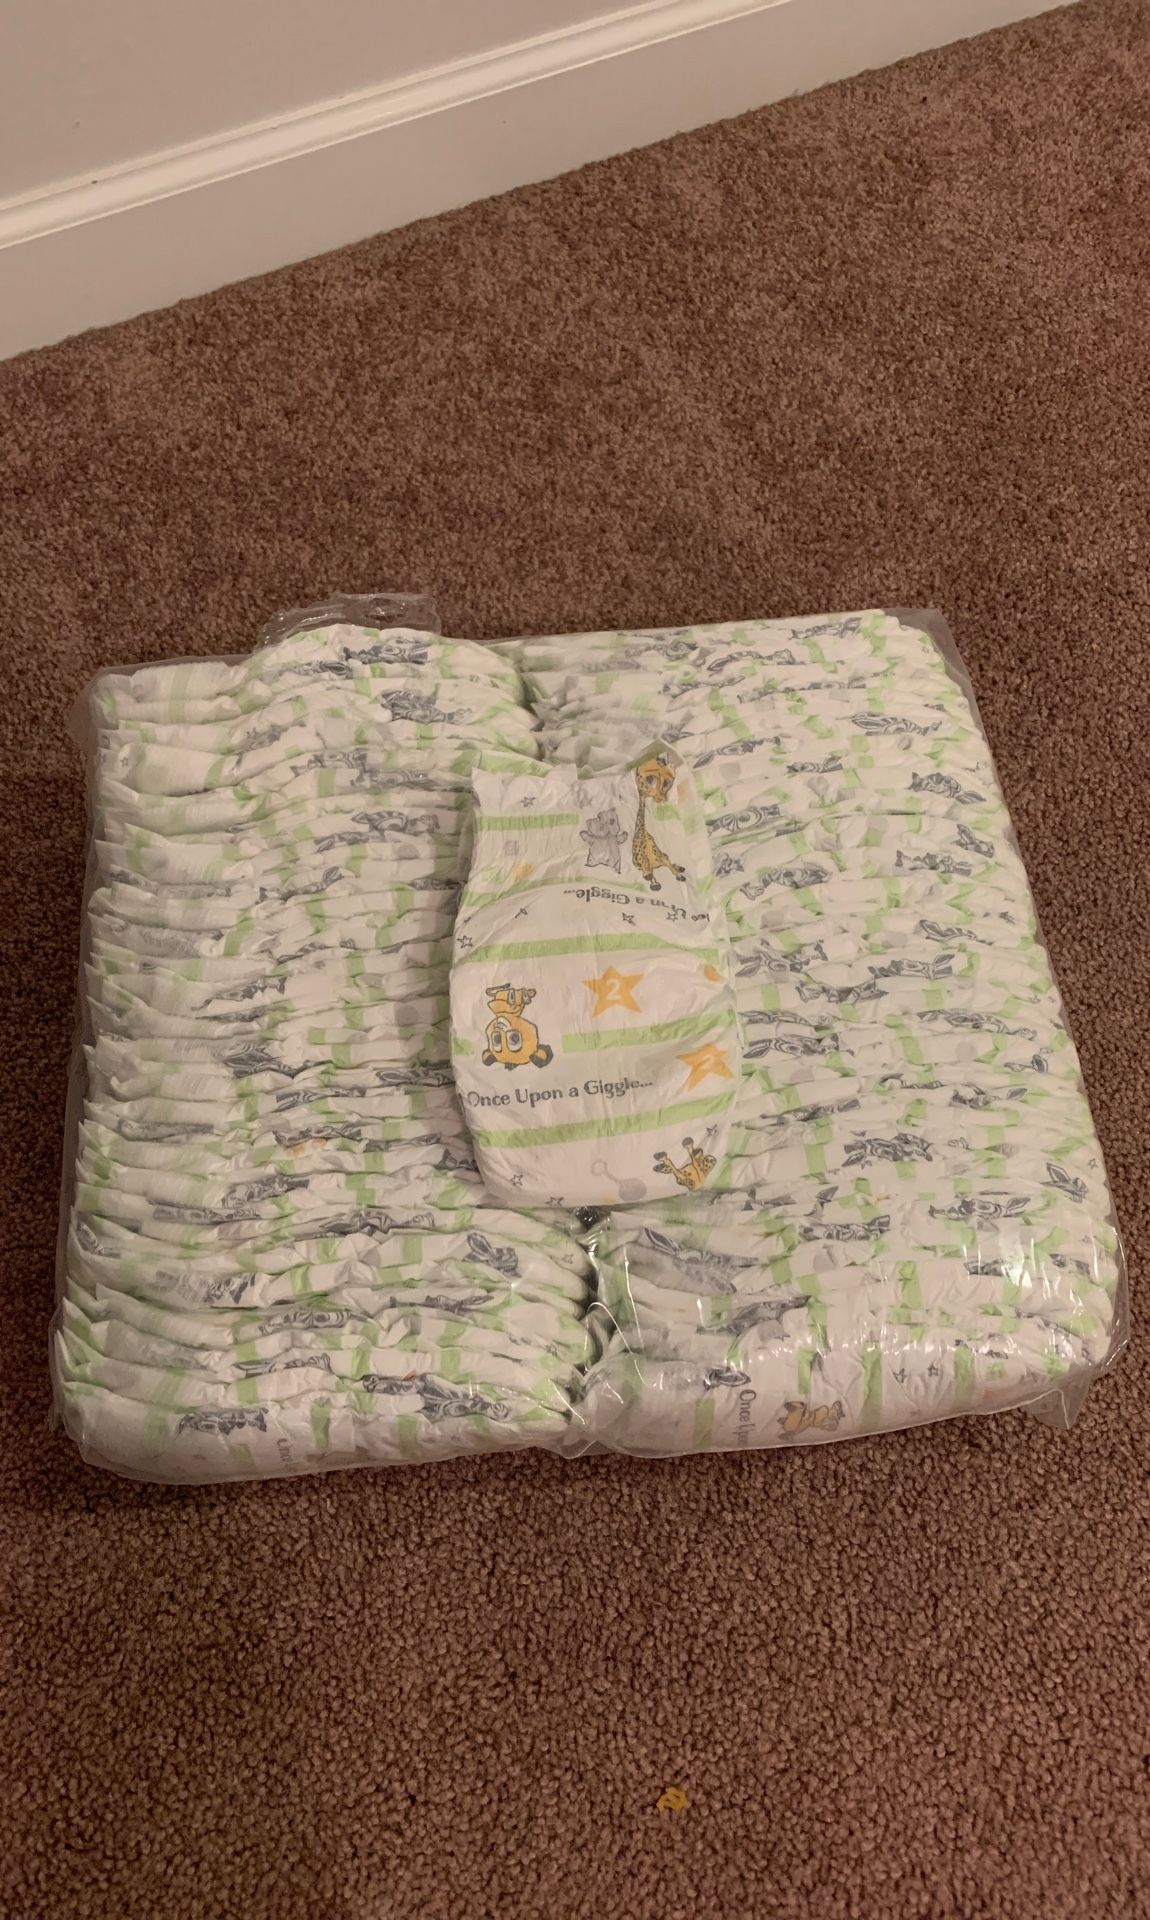 70 size 2 diapers